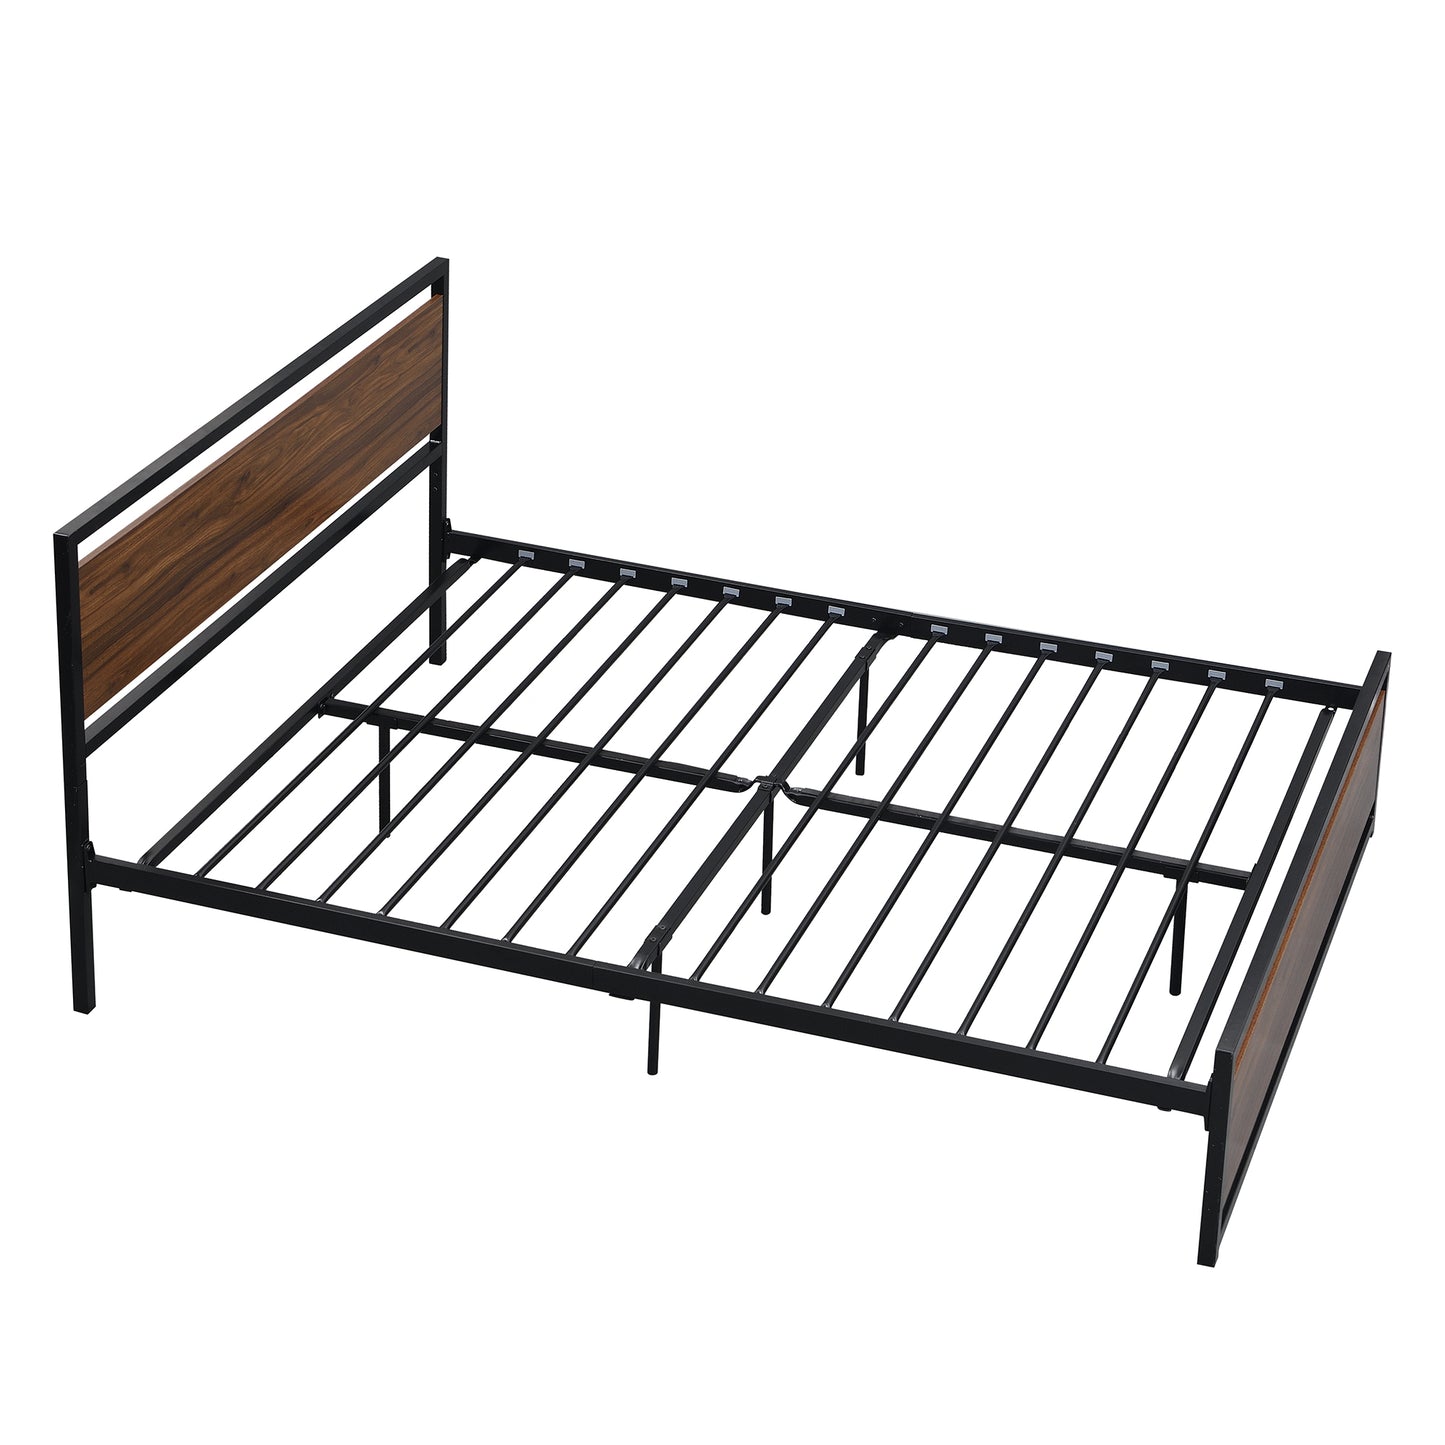 SYNGAR Black Iron Platform Bed Frame Full Size With Wooden Headboard and Footboard, New Upgrade Metal Legs Design, Industrial Full Bed Frame with Strong Slat Support